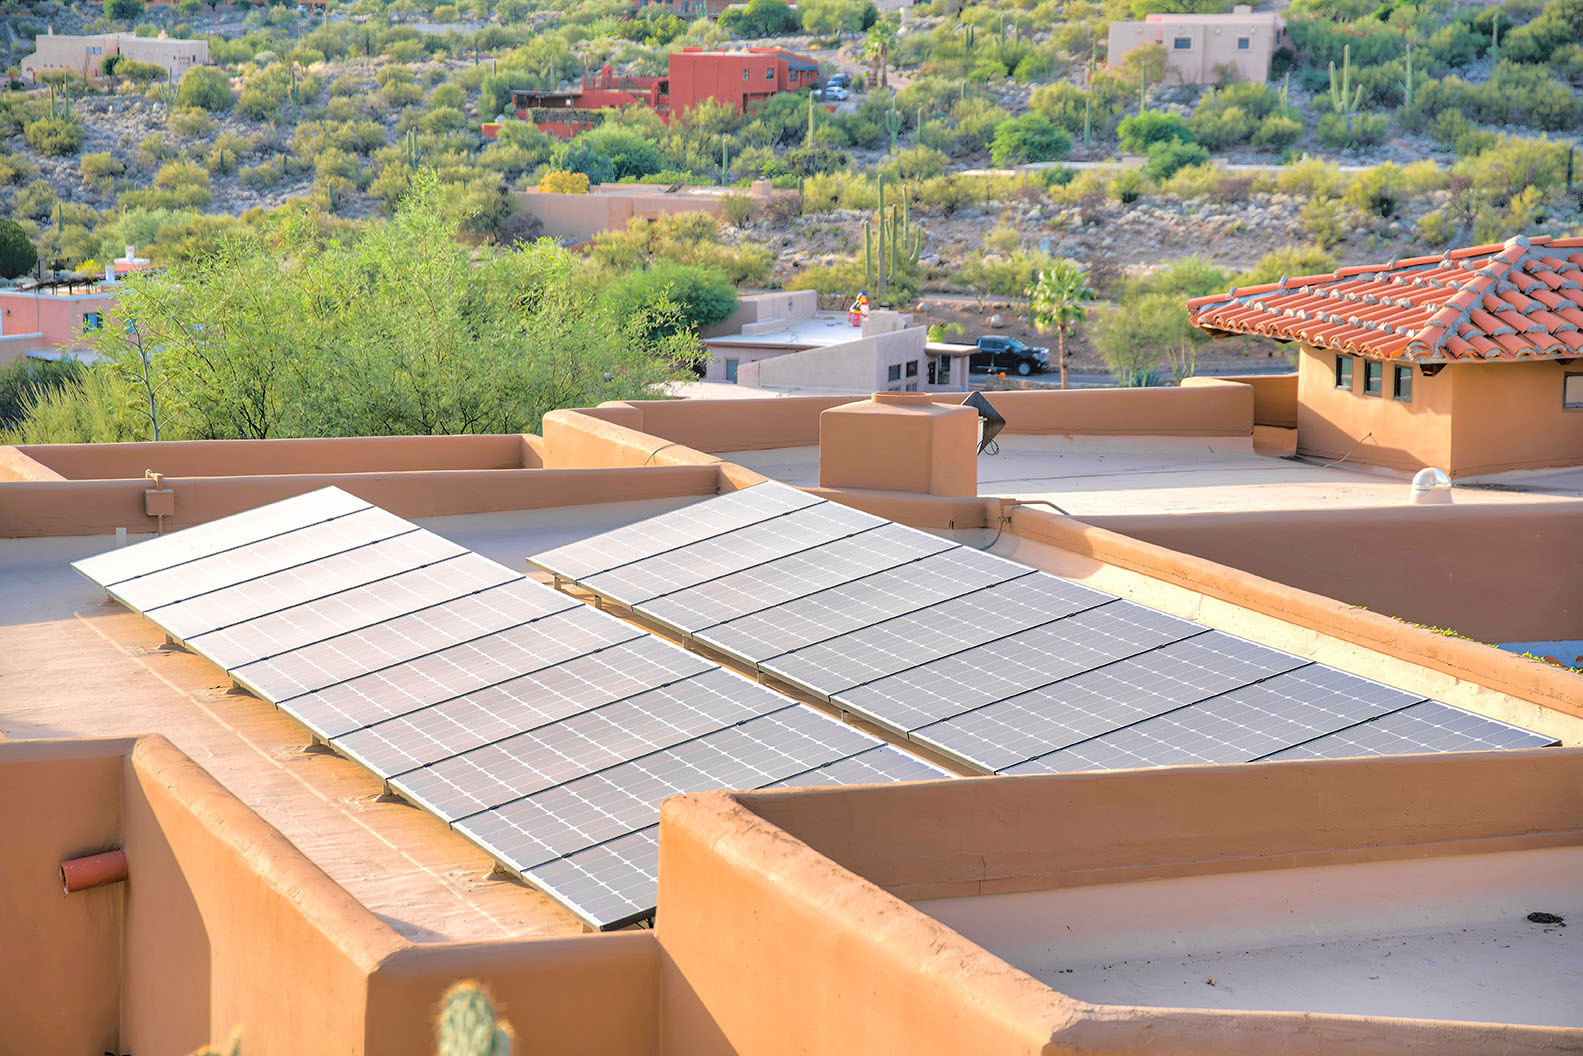 Solar panels on a flat roof of a mediterranean house at Tucson, Arizona. From the roof there is a view of a neighborhood with cactuses outdoors.